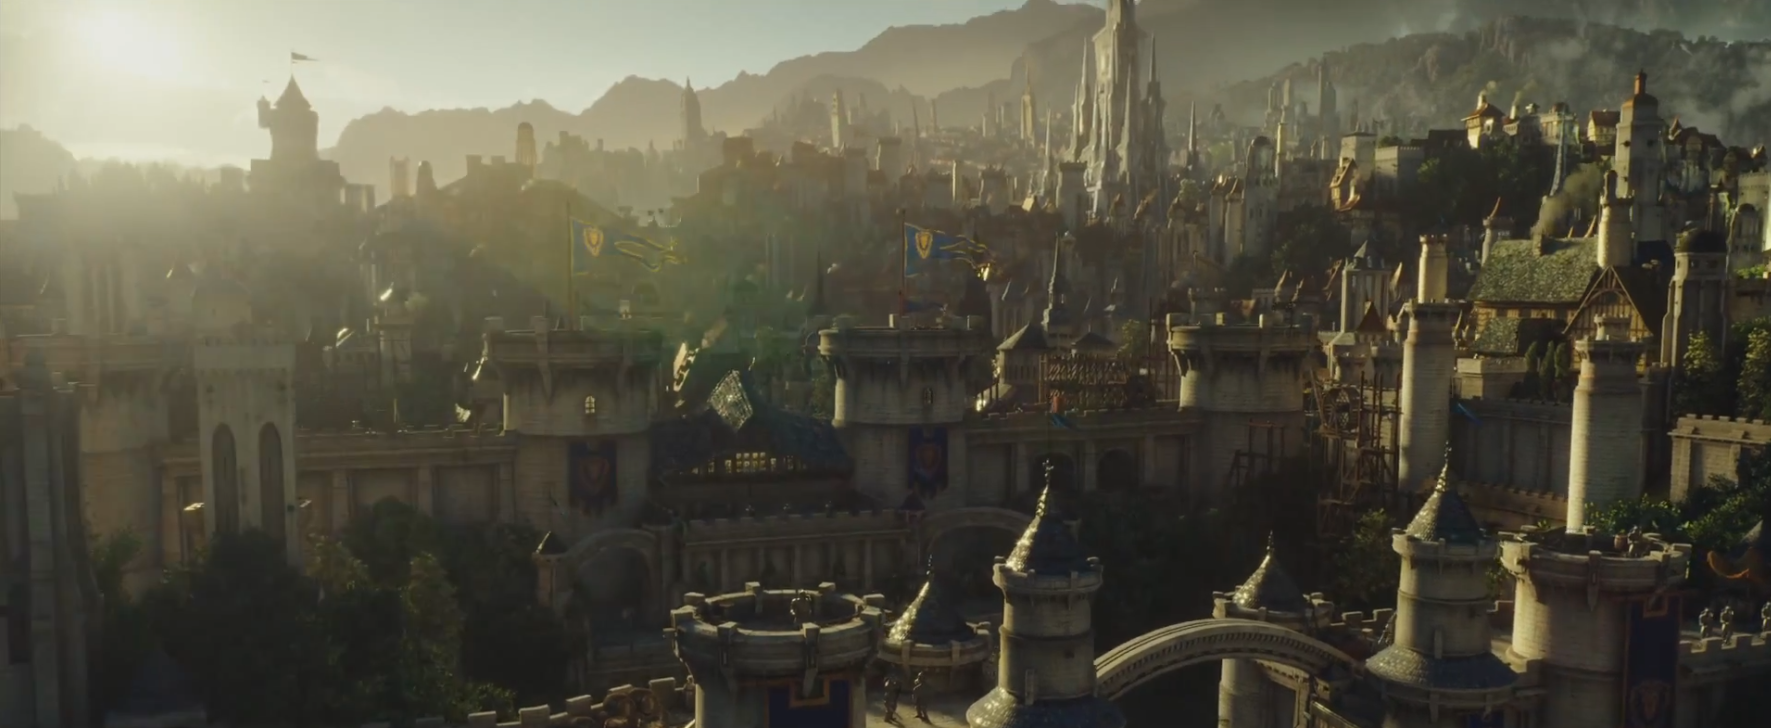 We analysed the Warcraft movie teaser in absurd detail and are now hyped